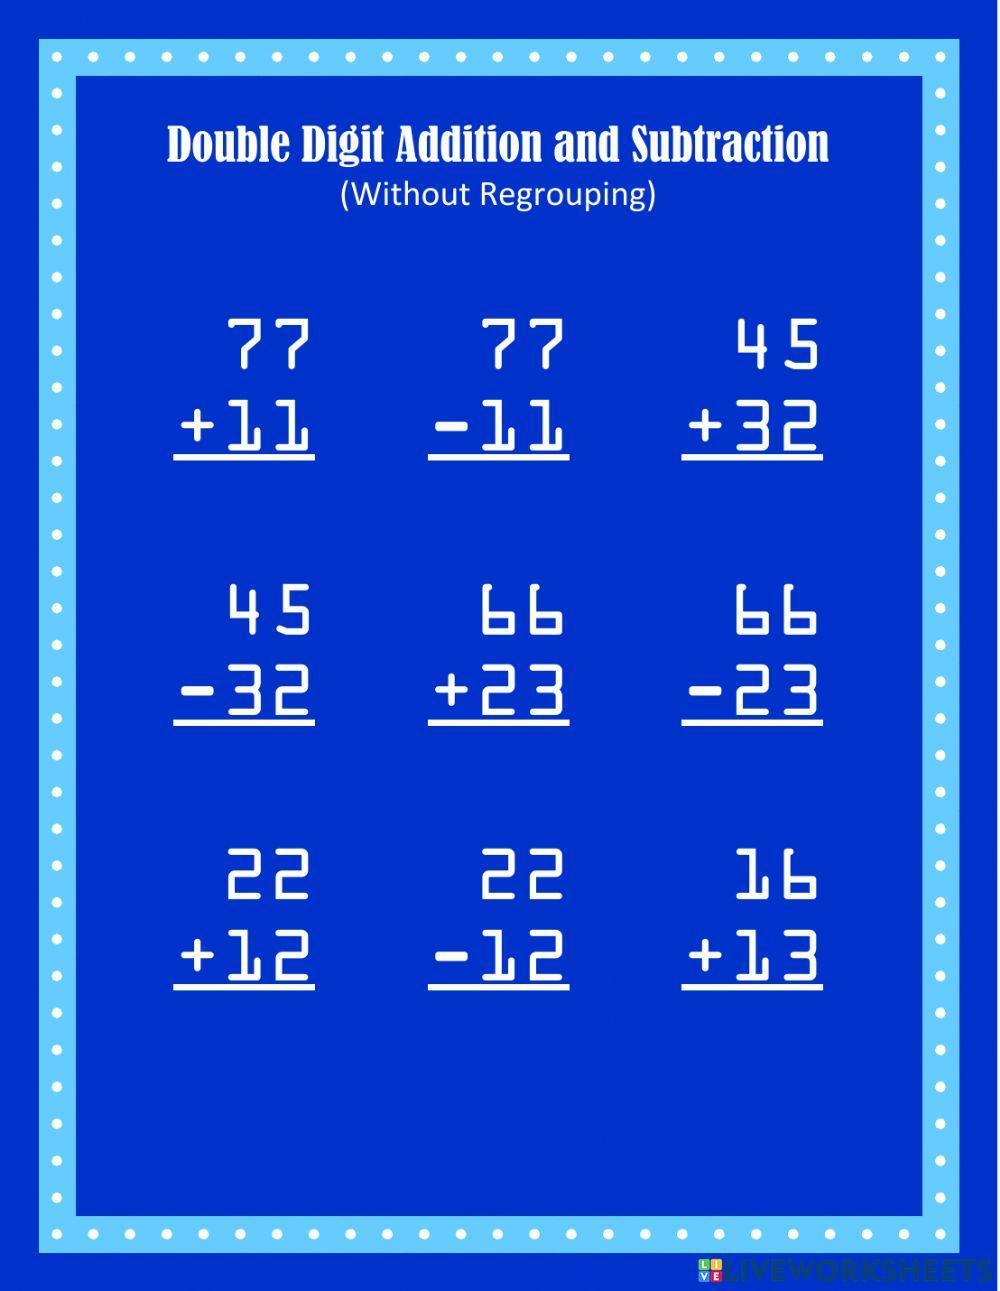 Double Digit Addition and Subtraction Set 6